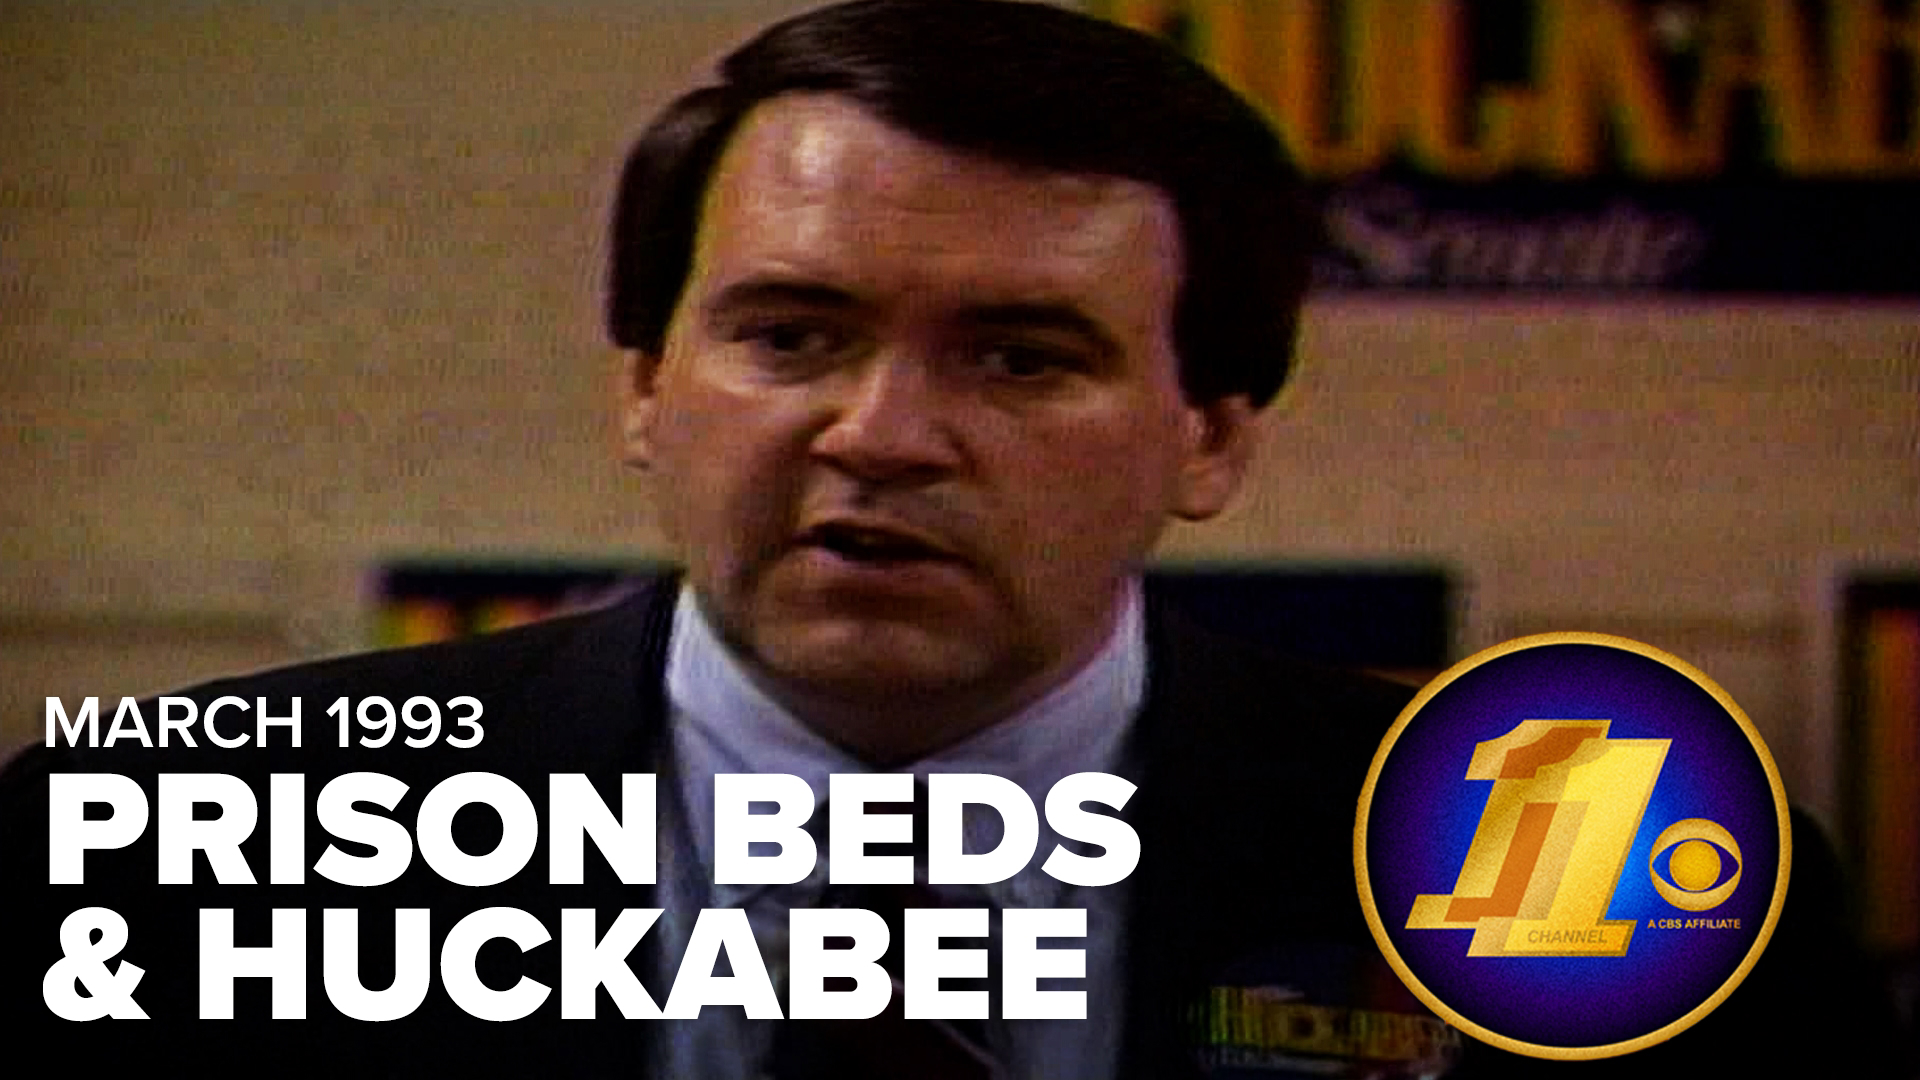 In March 1993, we covered prison overcrowding, Mike Huckabee's campaign for Lt. Gov., and Little Rock Central protests.